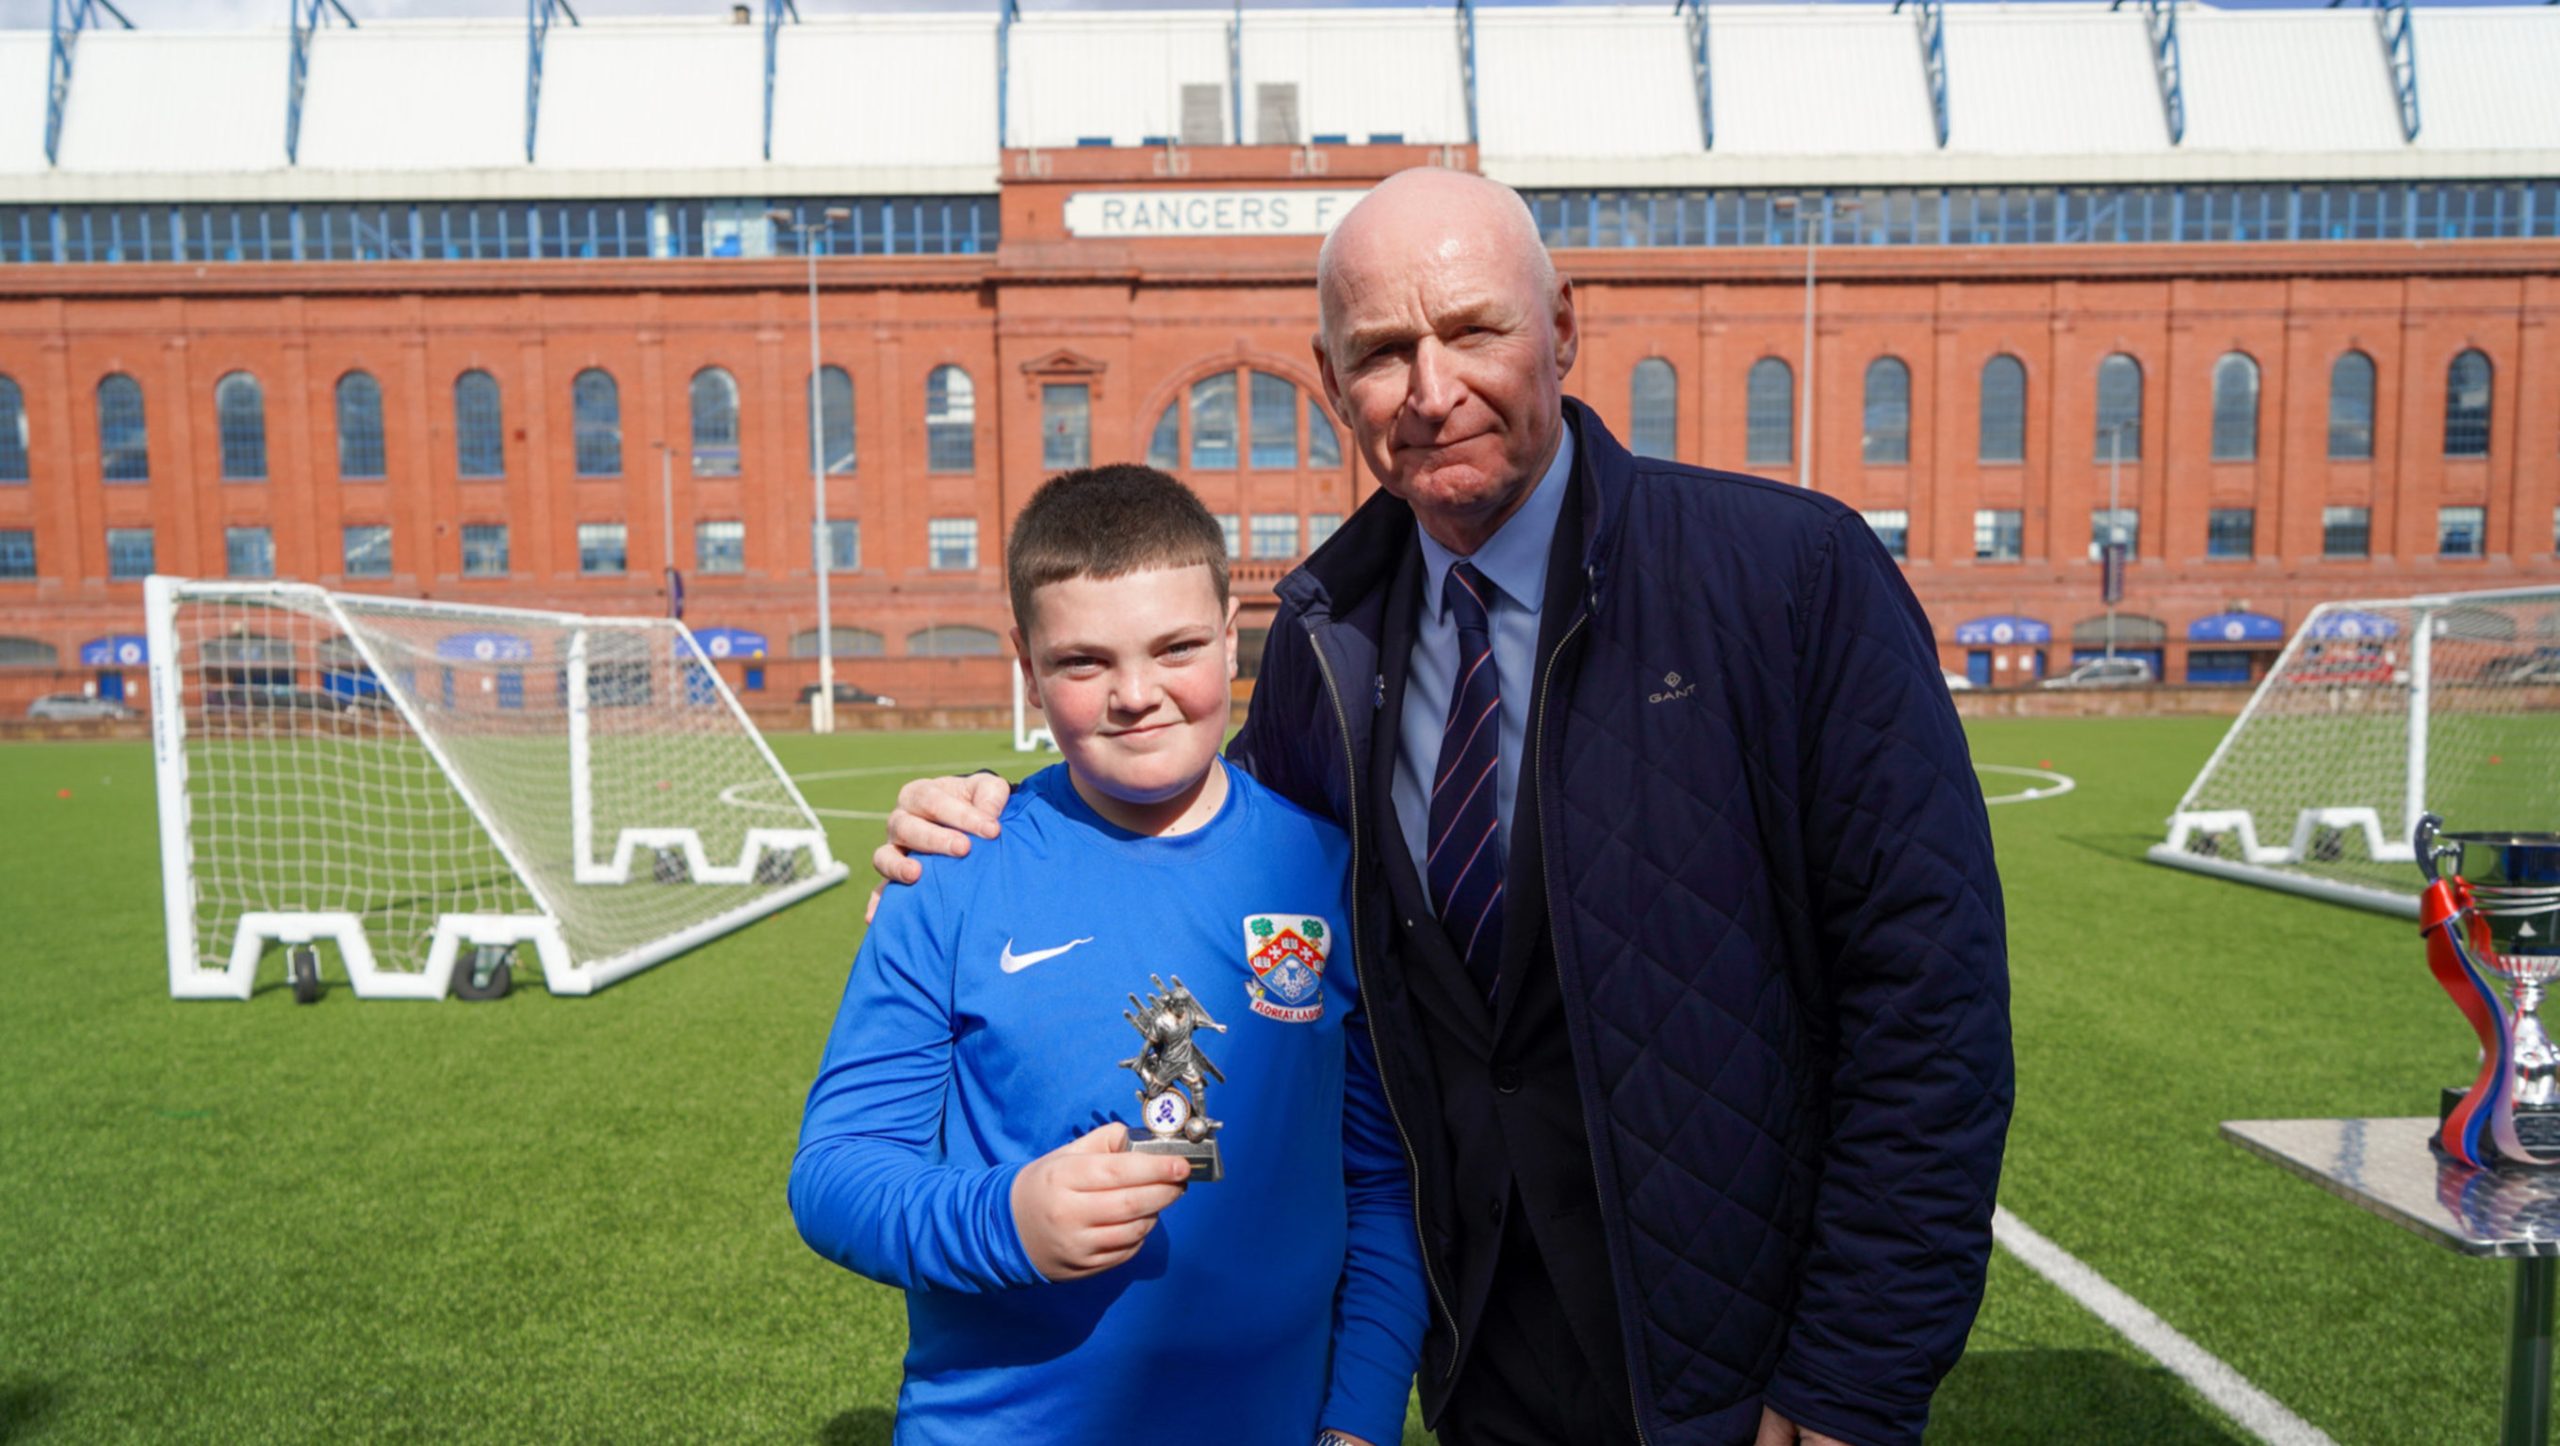 Former Rangers player John Brown presenting a Player of the match trophy